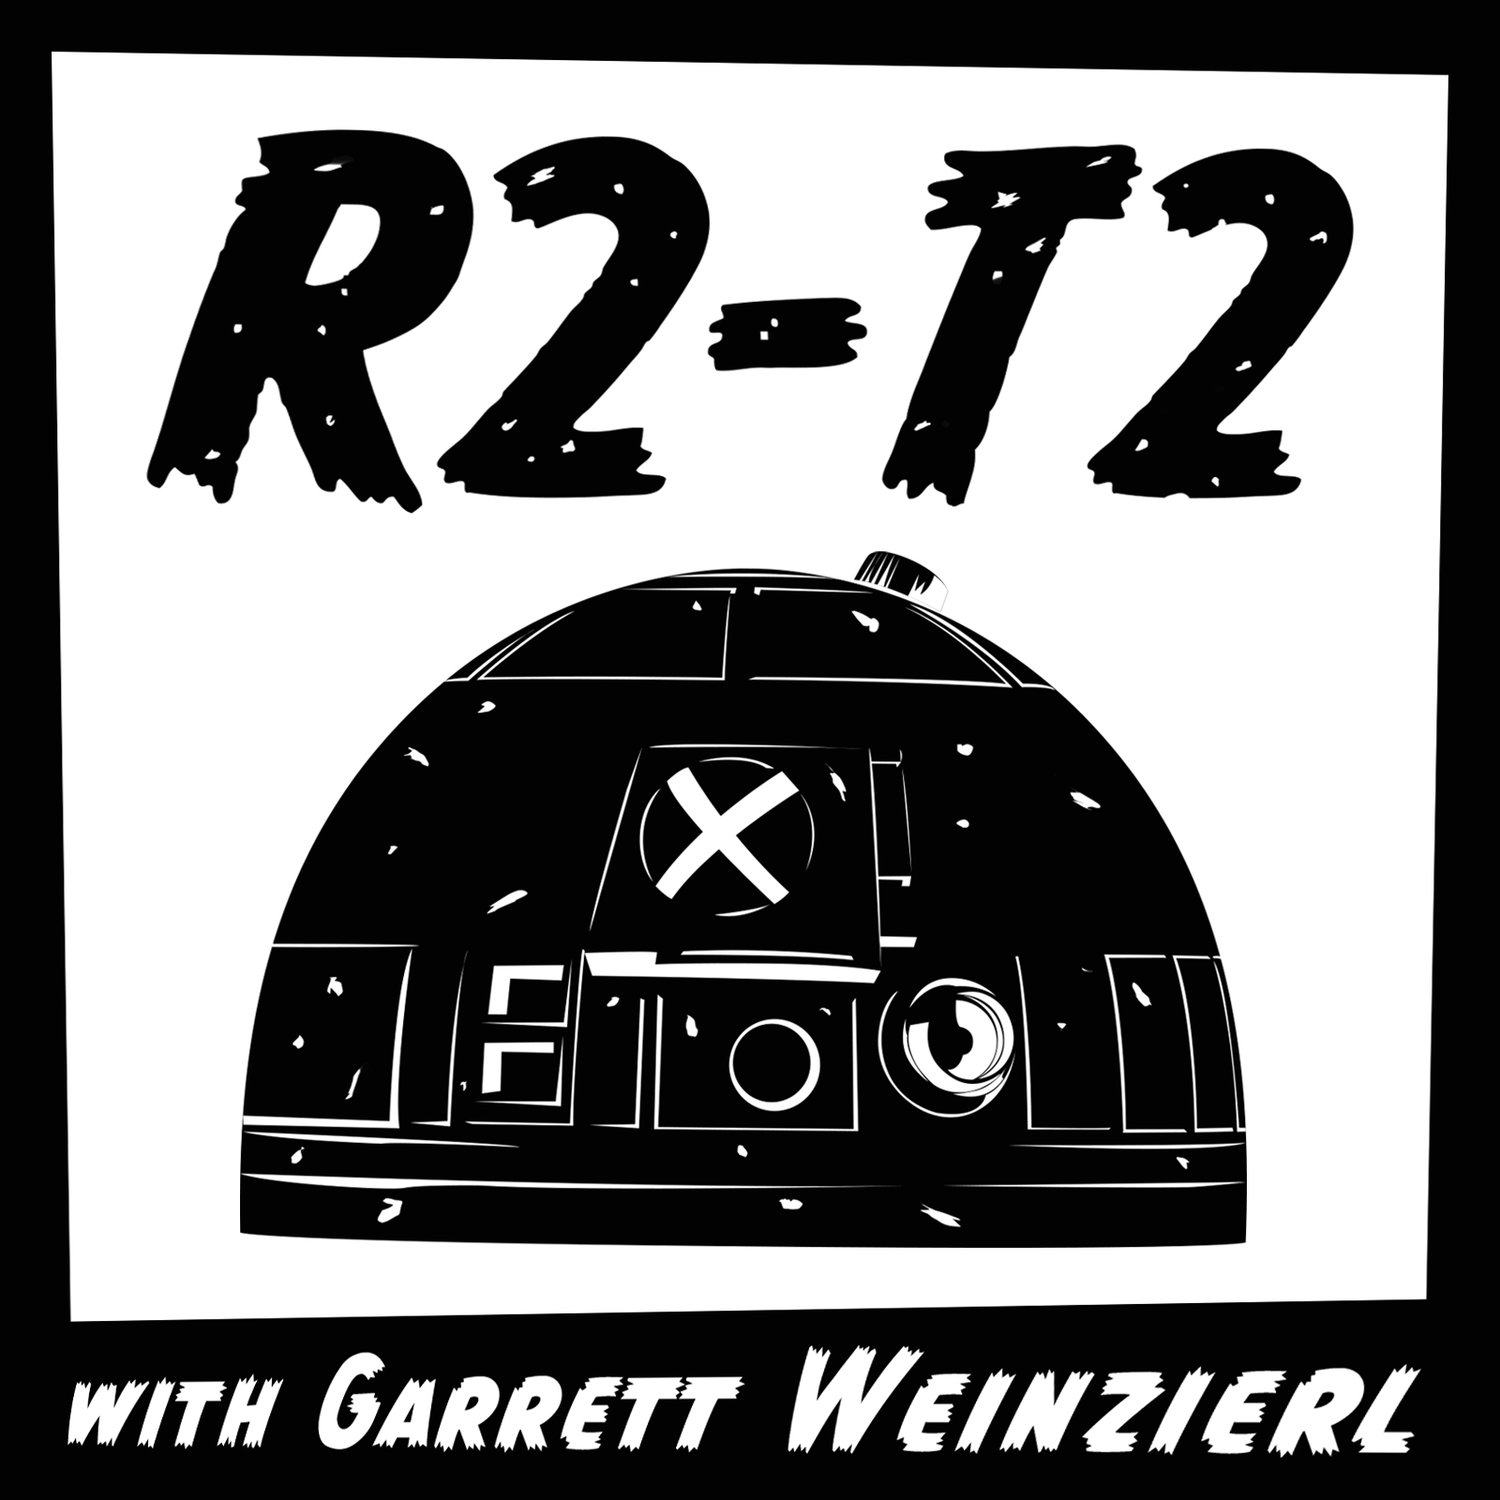 #56 - R2-T2: “I’ll be missing you”